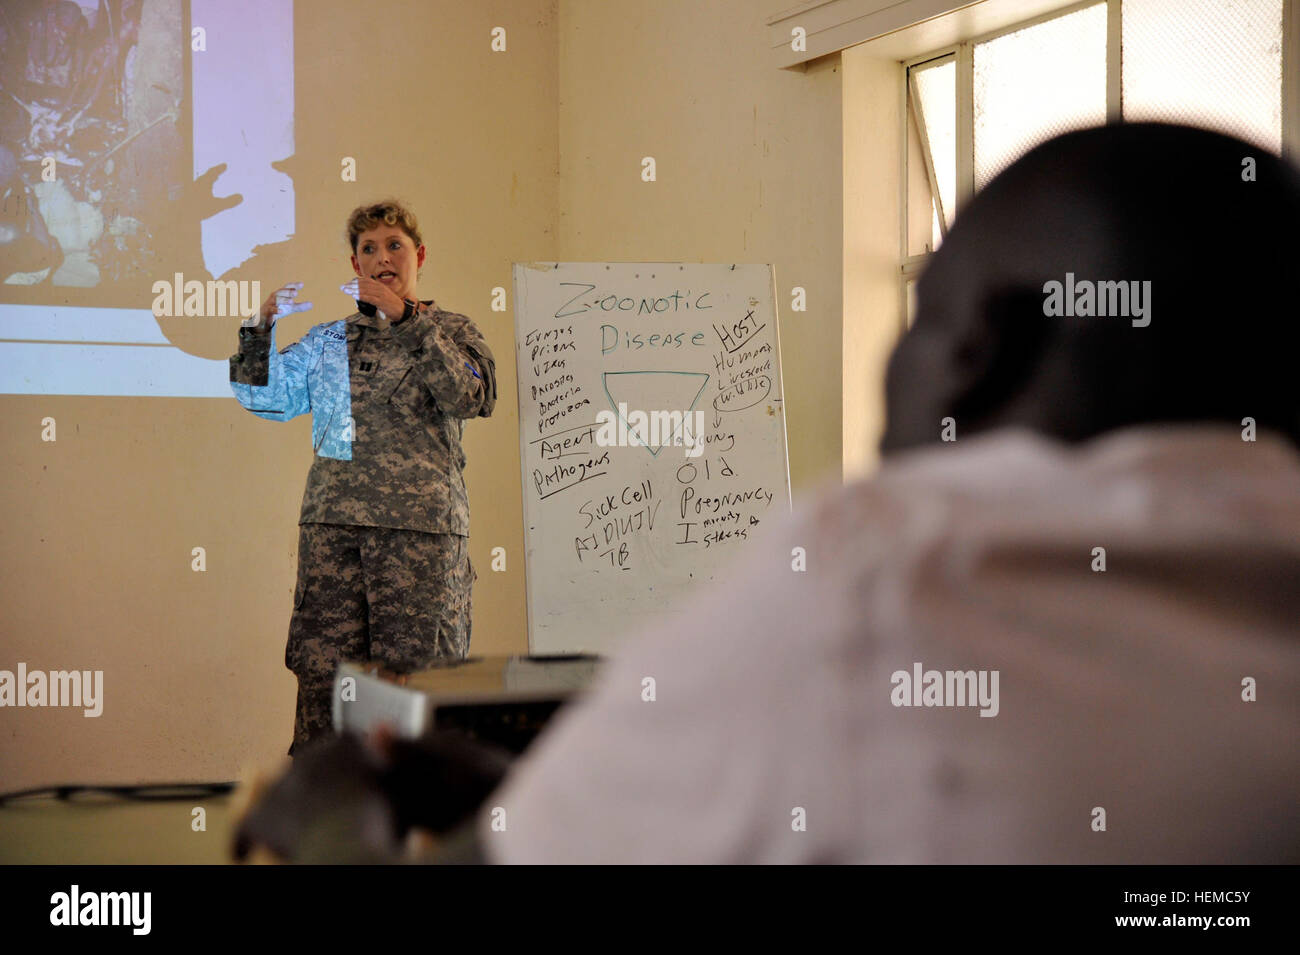 U.S. Army Capt. Heather Stone, 448th Civil Affairs Battalion Functional Specialty Team veterinarian officer in charge, facilitates a class on zoonotic diseases during the classroom instruction portion of the One Health training held Nov. 18 to 27, 2012. Soldiers from Combined Joint Task Force-Horn of Africa partnered with local Ugandan leadership, Makerere University, the Uganda People's Defense Force and the U.S. Agency for International Development to help strengthen the capabilities and knowledge of Ugandan veterinarian and public health workers. (U.S. Army photo by Staff Sgt. Shejal Puliva Stock Photo